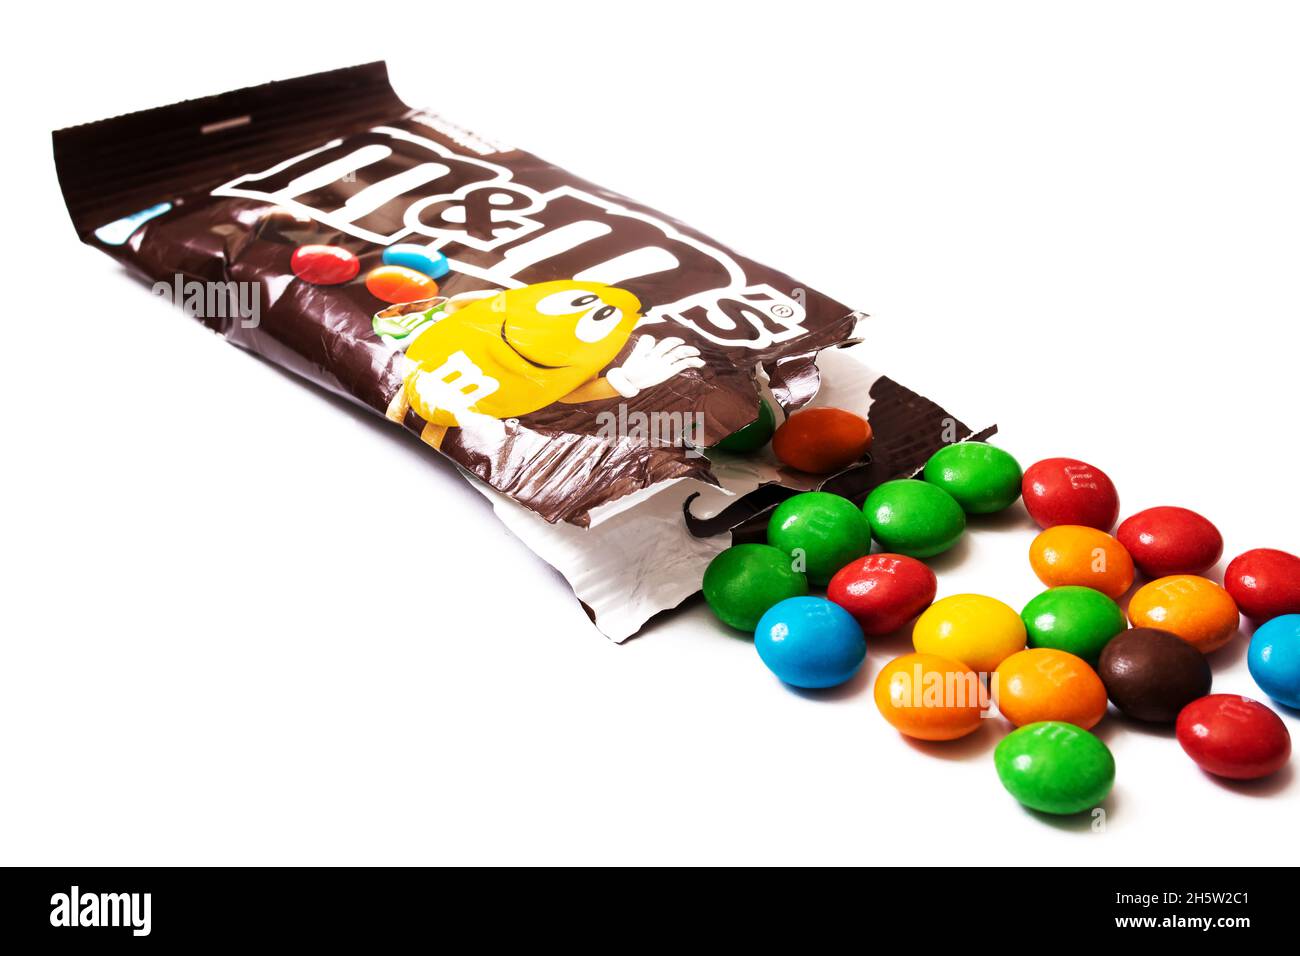 Peanut m&ms Cut Out Stock Images & Pictures - Alamy